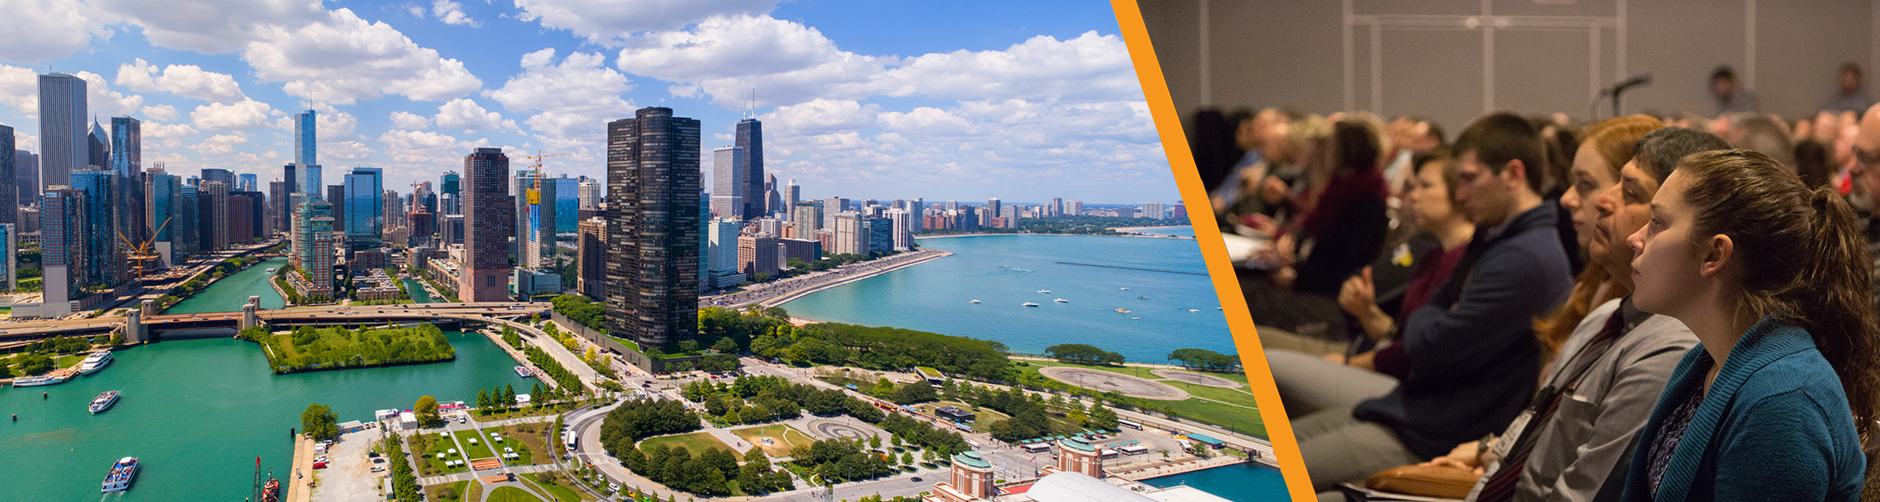 composite image of chicago skyline and meeting attendees